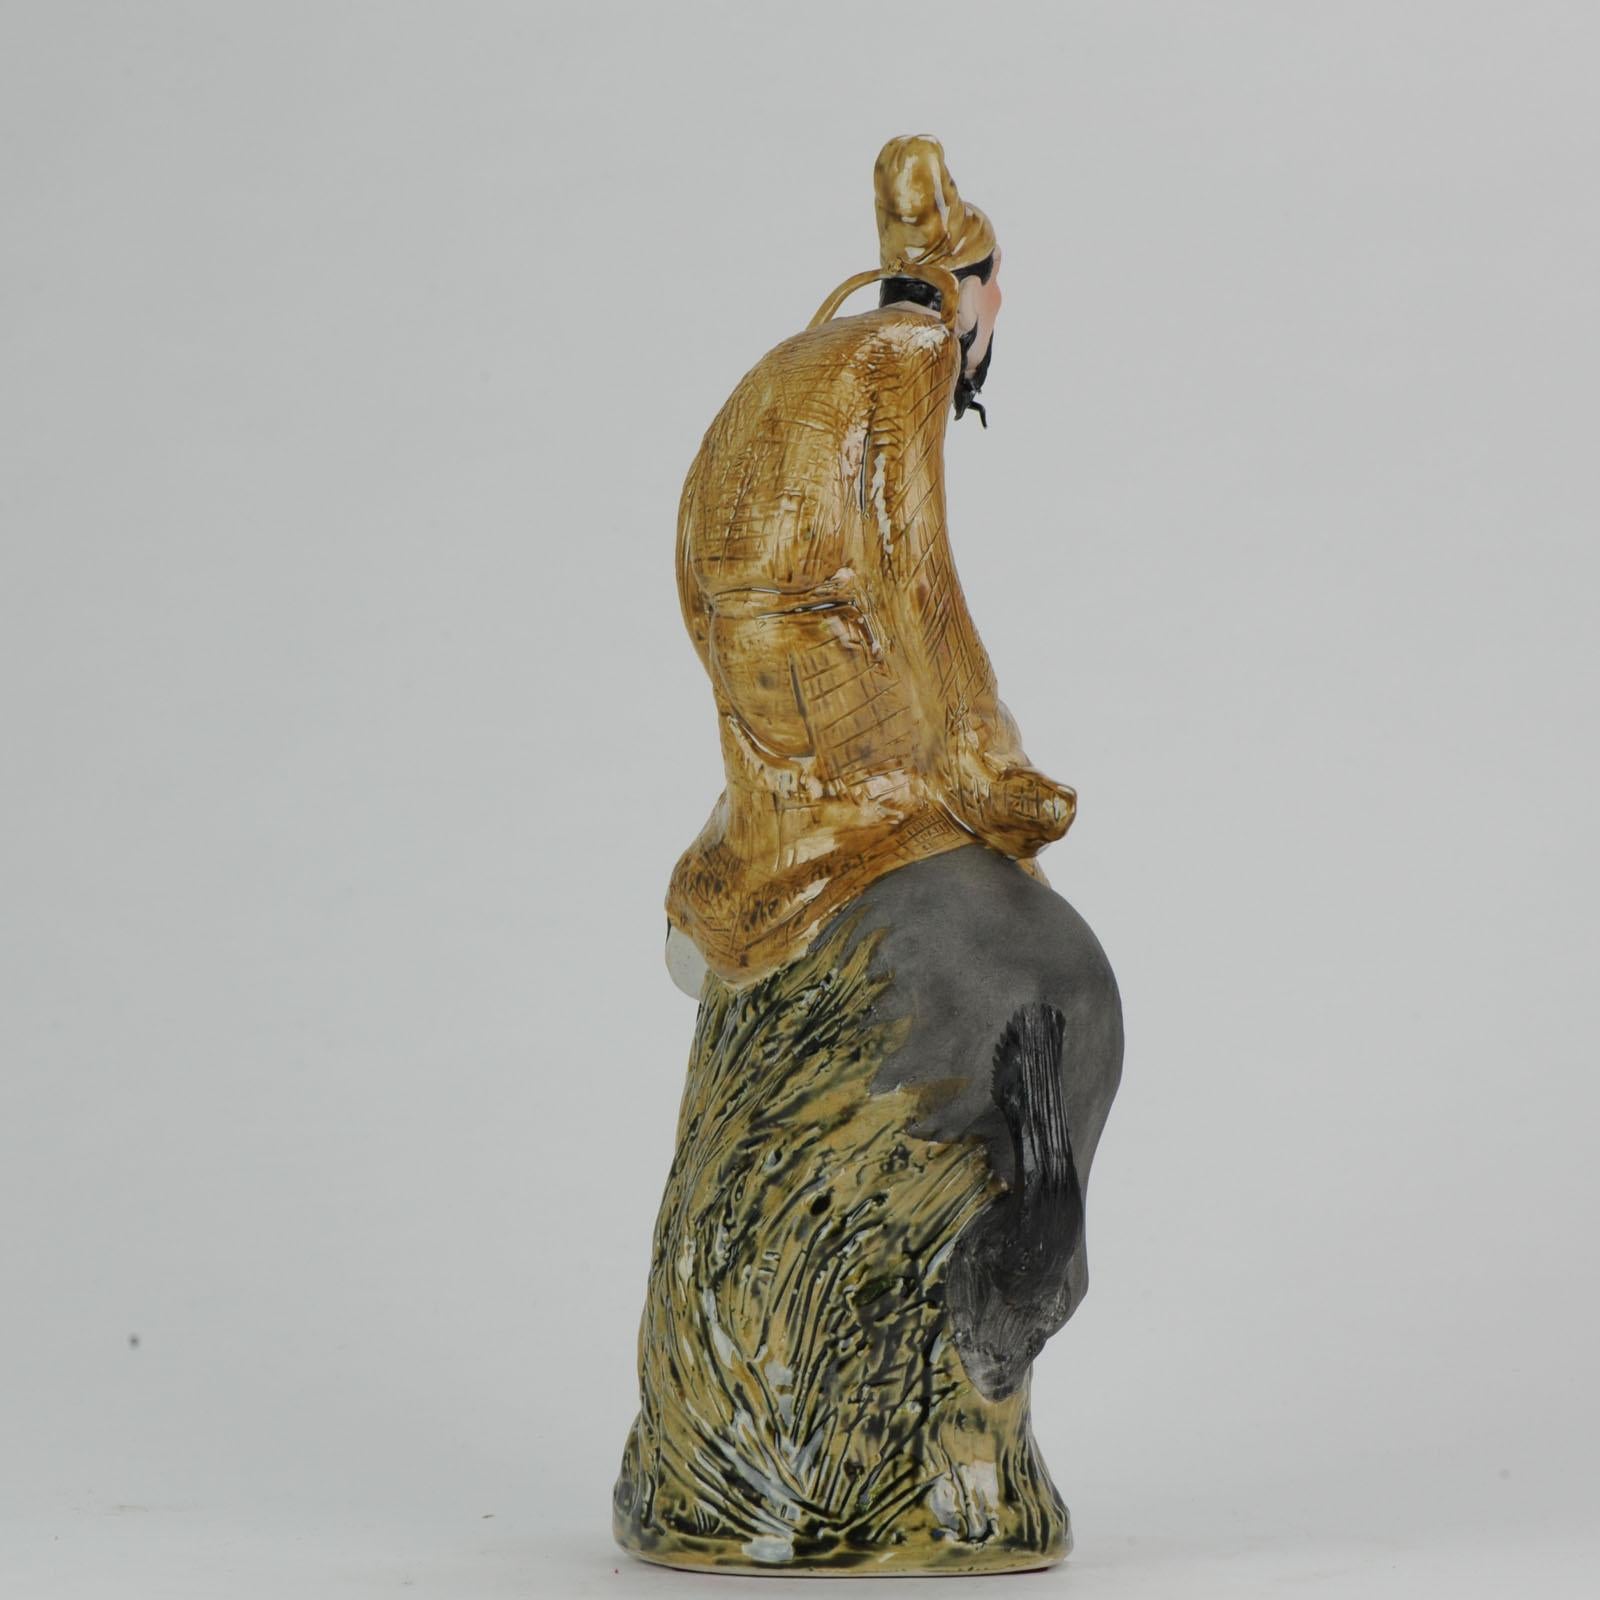 Chinese porcelain sculpture Man on Horse, Dated 1998, Created by Xu Jian Jian For Sale 5